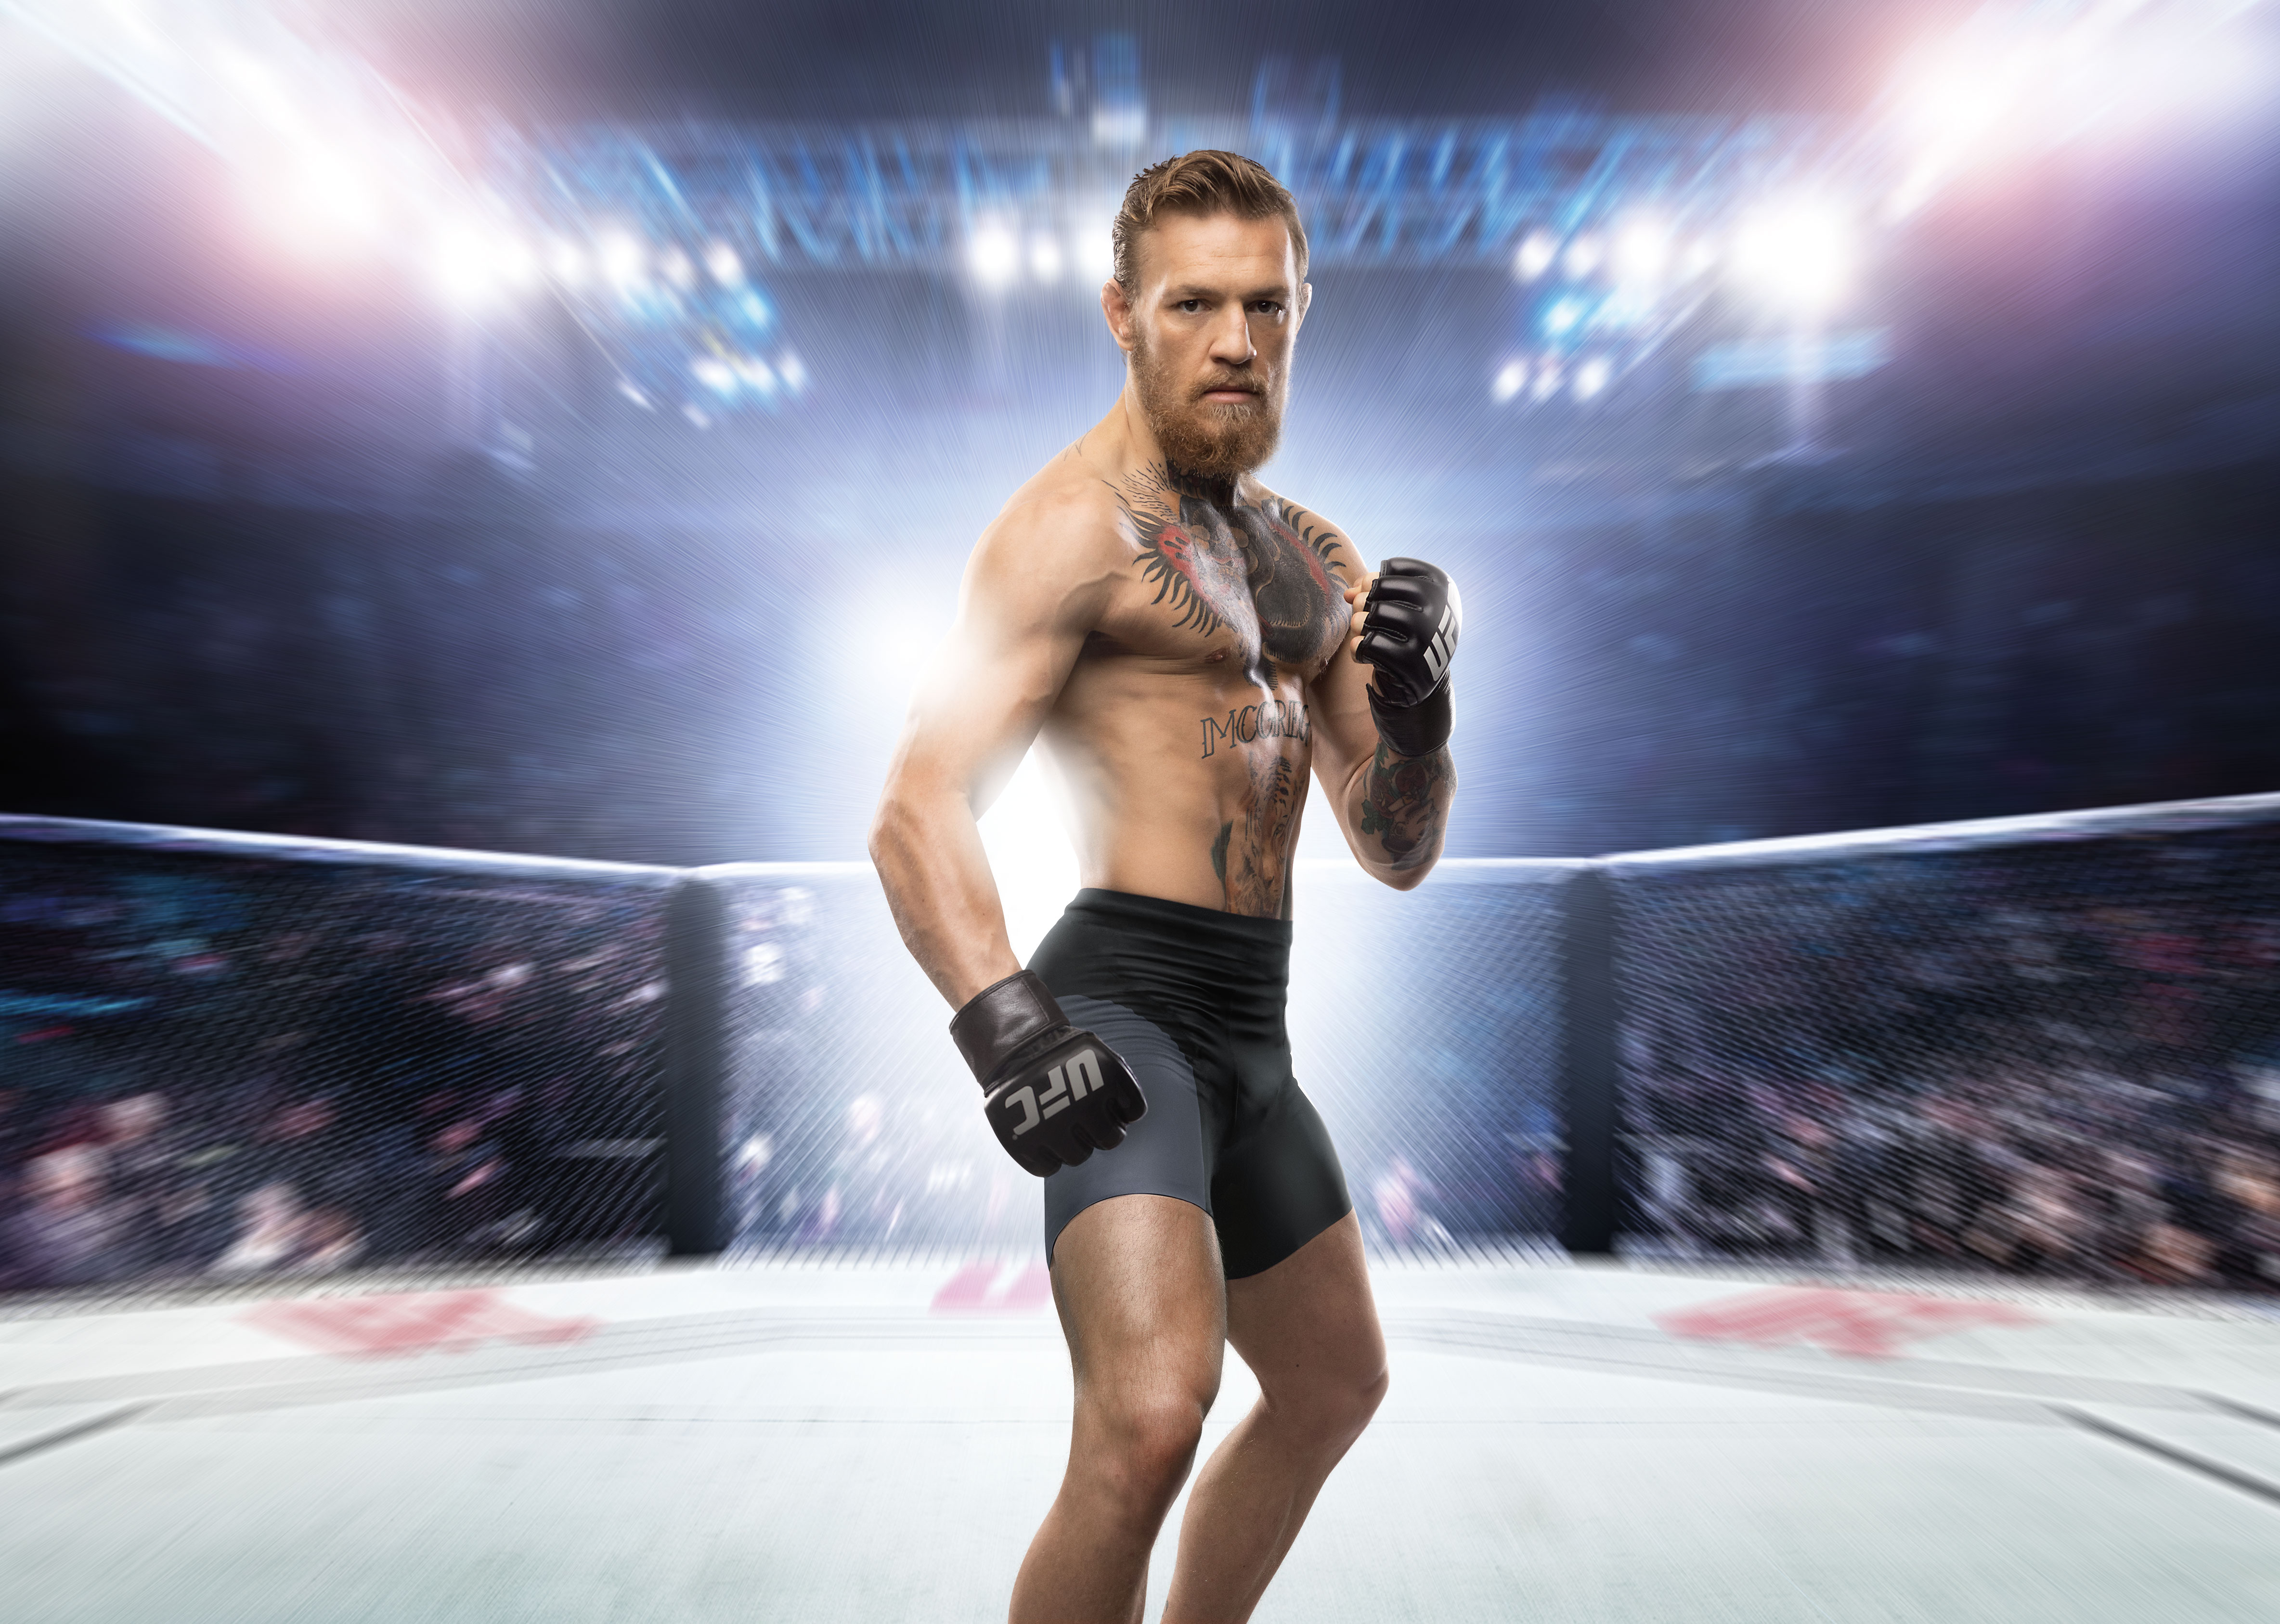 download ufc 3 for android free